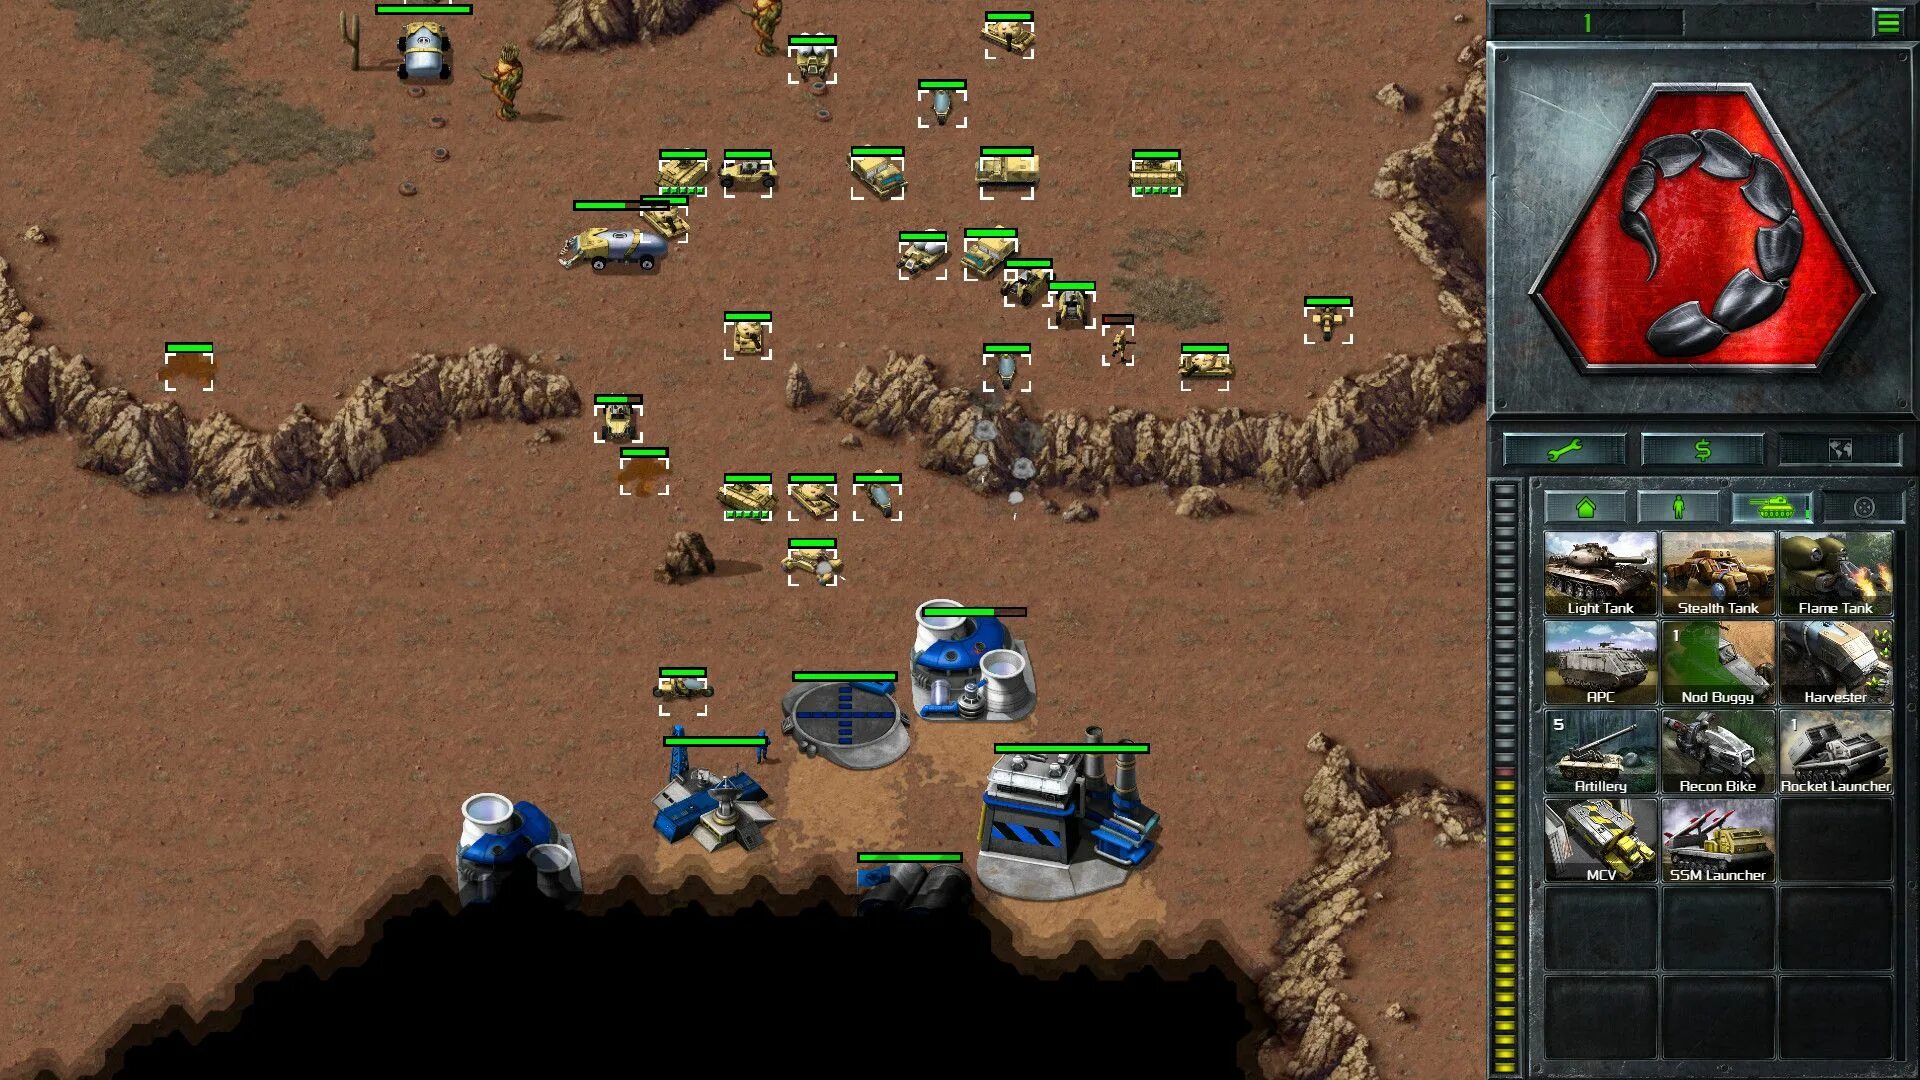 Command and Conquer Remastered. Command & Conquer Remastered collection. Command and Conquer 1995 Remaster. Command Conquer 2 Remastered collection.